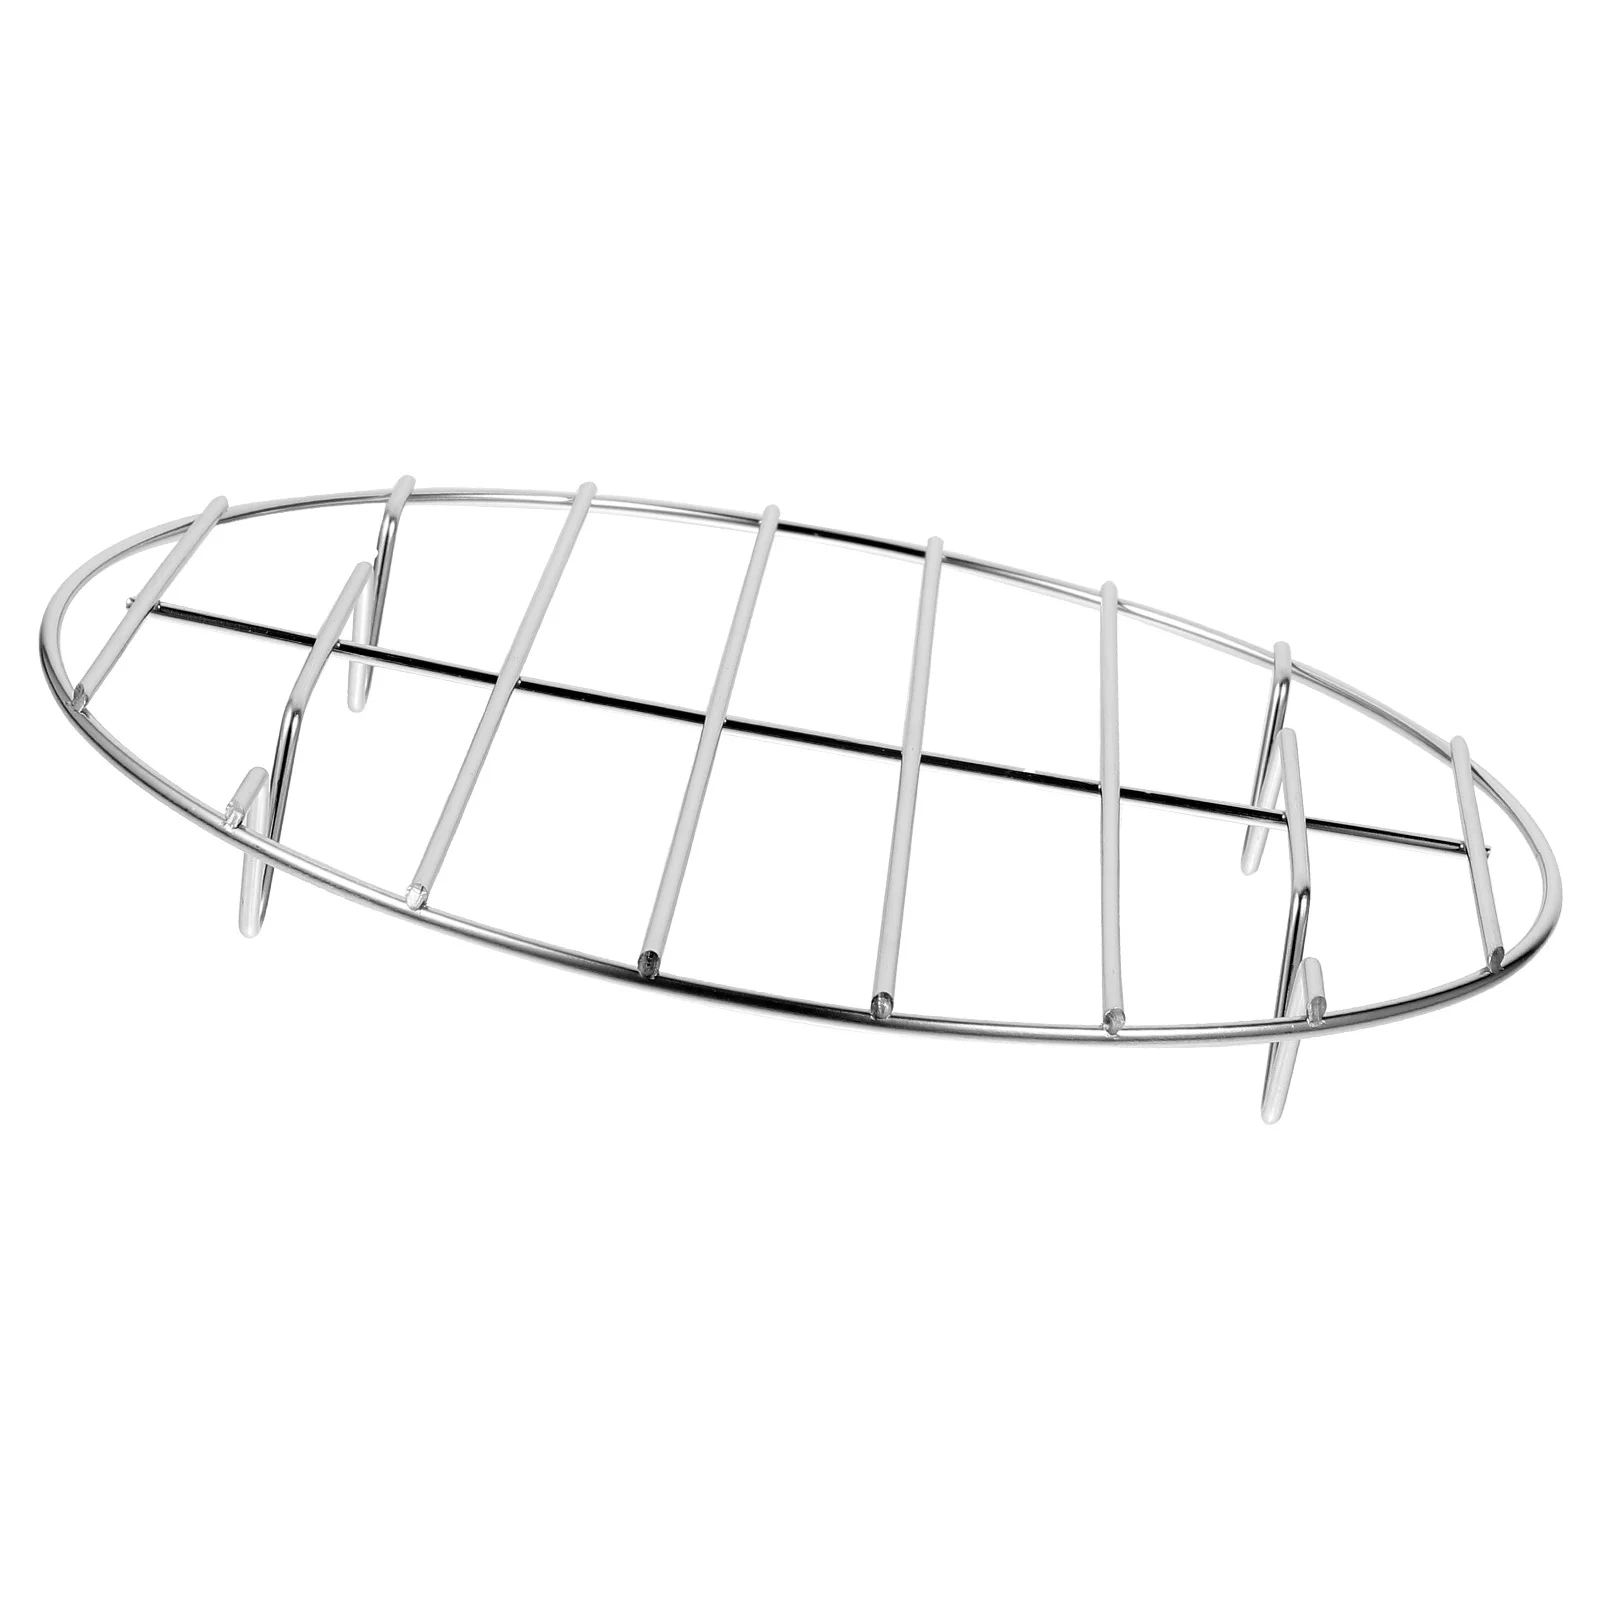 

Sherchpry Gas Grill Round Baking Rack Stainless Steel Cooling Cooking Racks Steamer Pizza Oven Pot Air Fryer Canning